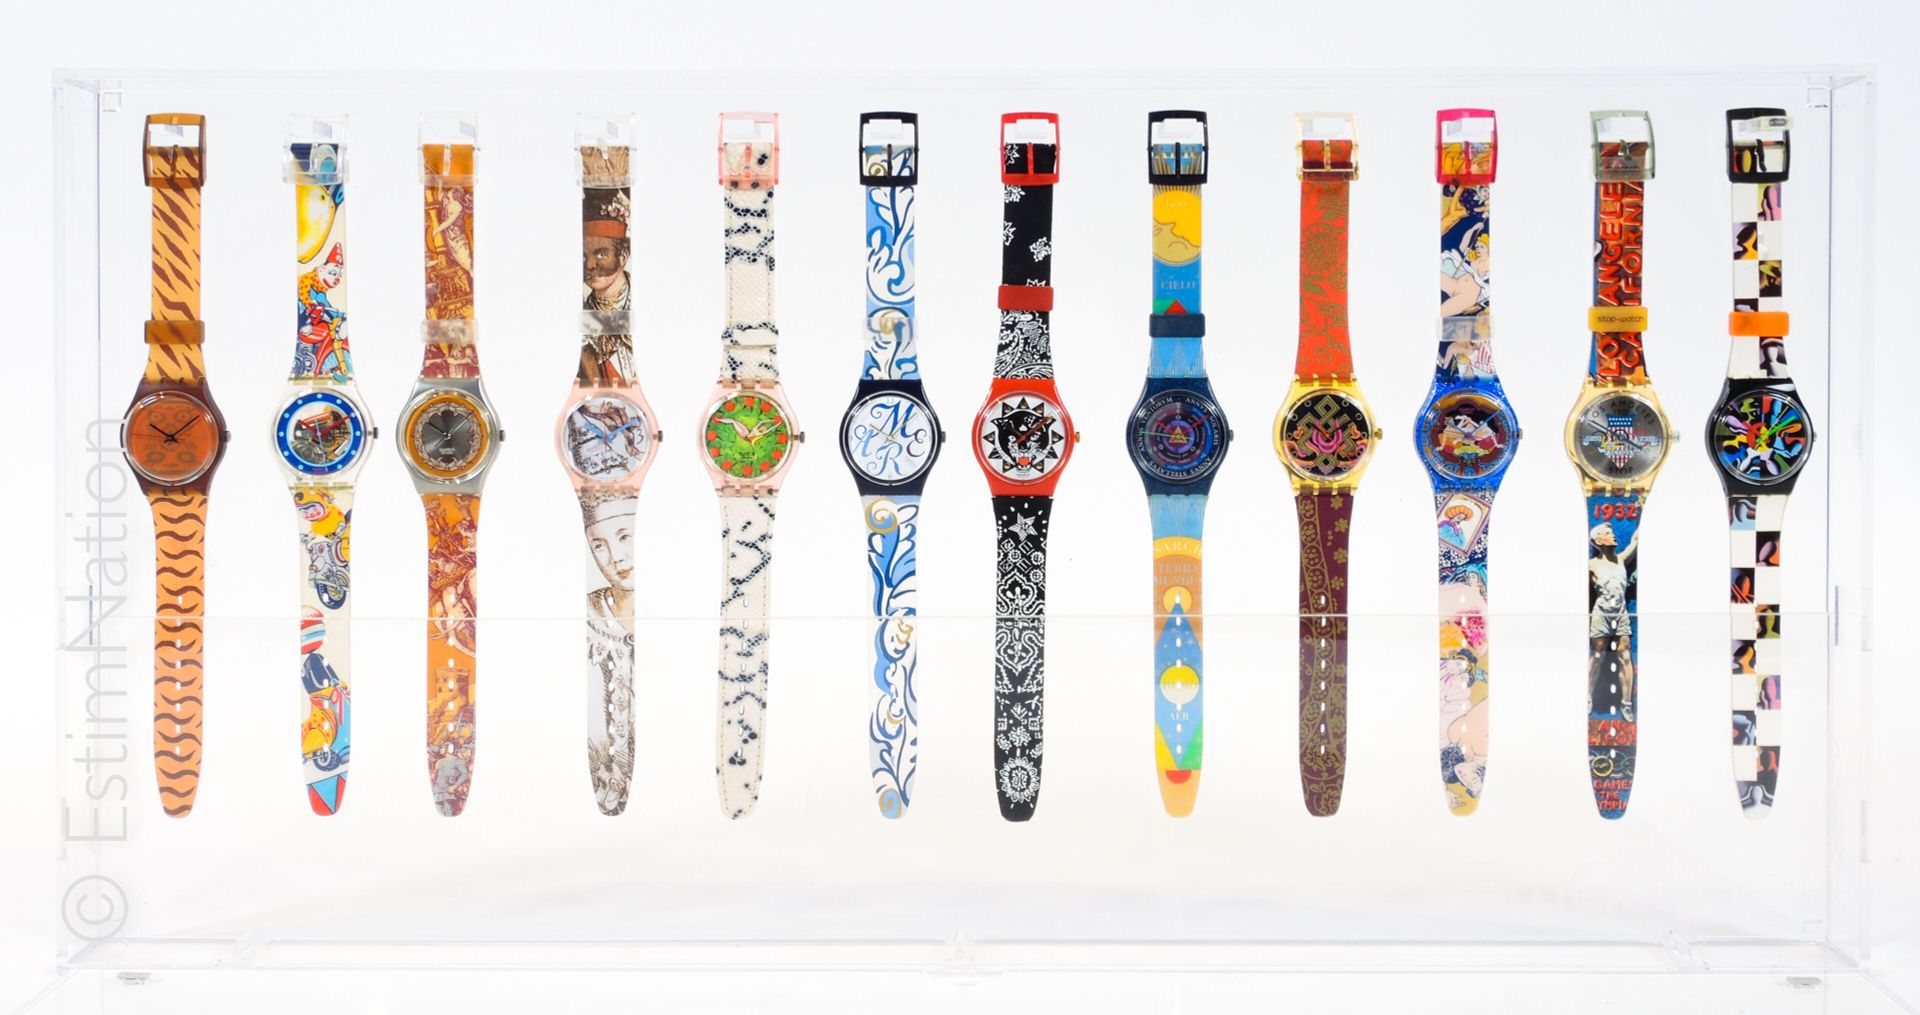 SWATCH - COLLECTORS BOX - entre 1993 et 1995 
SWATCH - COLLECTORS BOX




The Or&hellip;